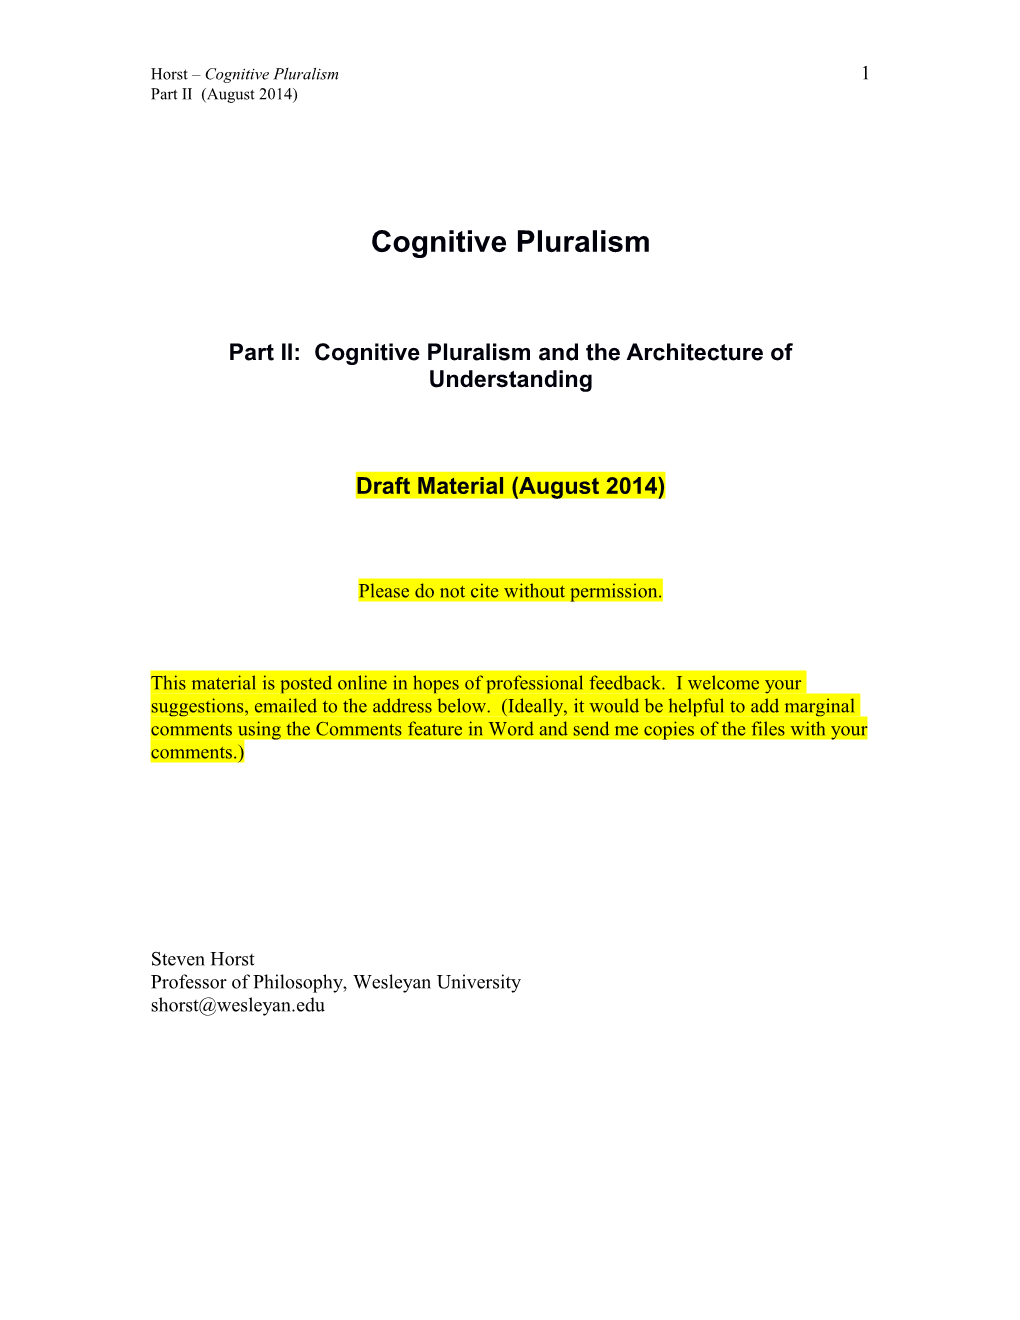 Part II: Cognitive Pluralism and the Architecture of Understanding